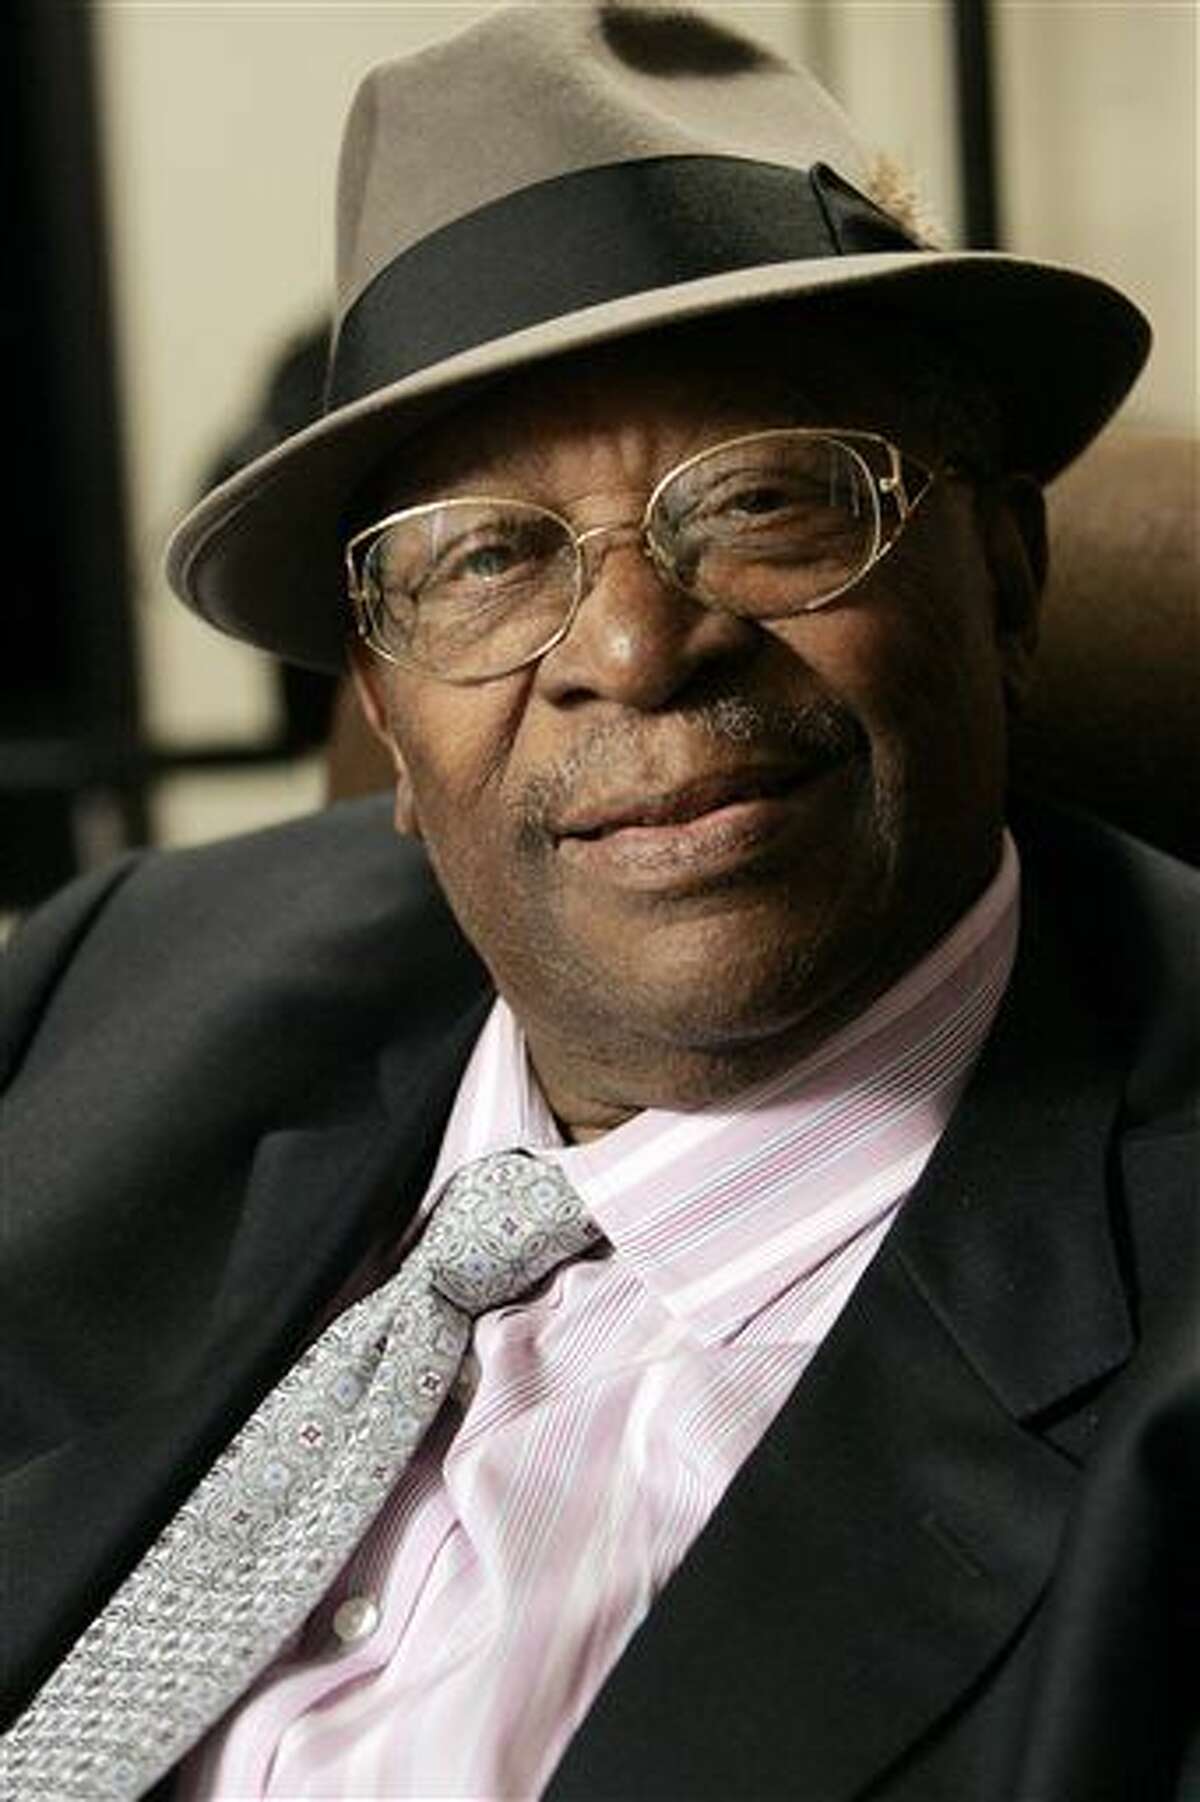 In this photo taken on Wednesday, Aug. 27, 2008, Blues legend B.B. King pauses during an interview in Los Angeles. King, whose scorching guitar licks and heartfelt vocals made him the idol of generations of musicians and fans while earning him the nickname King of the Blues, died late Thursday, May 14, 2015, at home in Las Vegas. He as 89. (AP Photo/Reed Saxon)